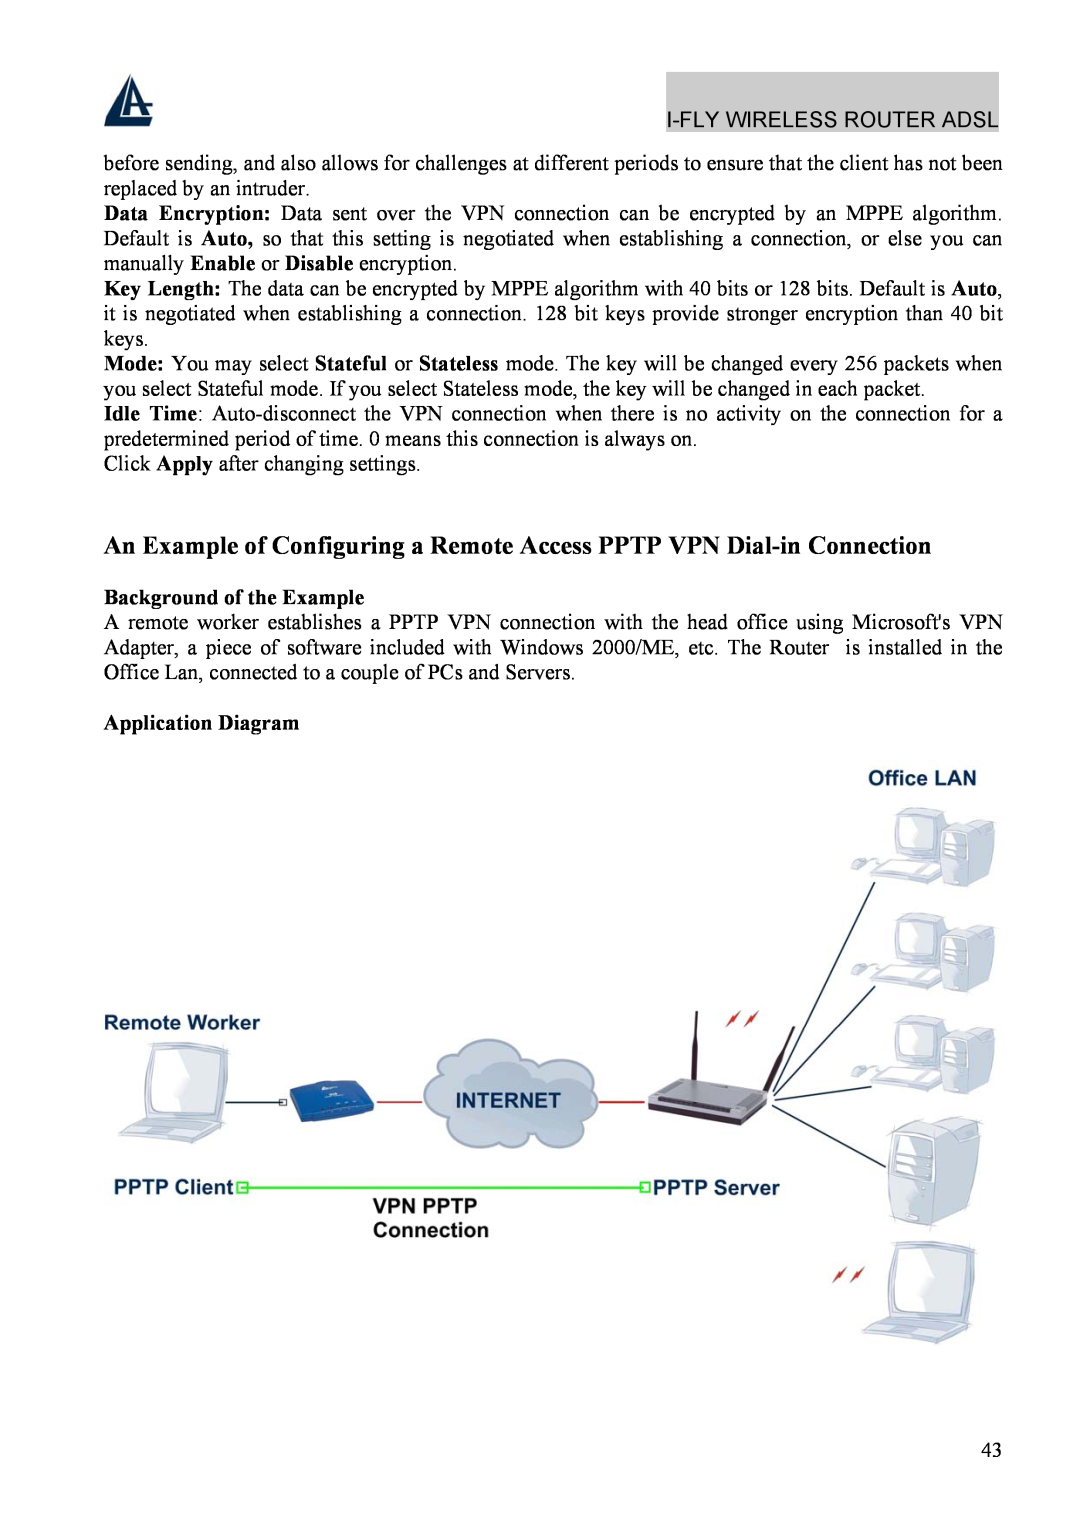 Atlantis Land A02-WRA4-54G An Example of Configuring a Remote Access PPTP VPN Dial-in Connection, Application Diagram 